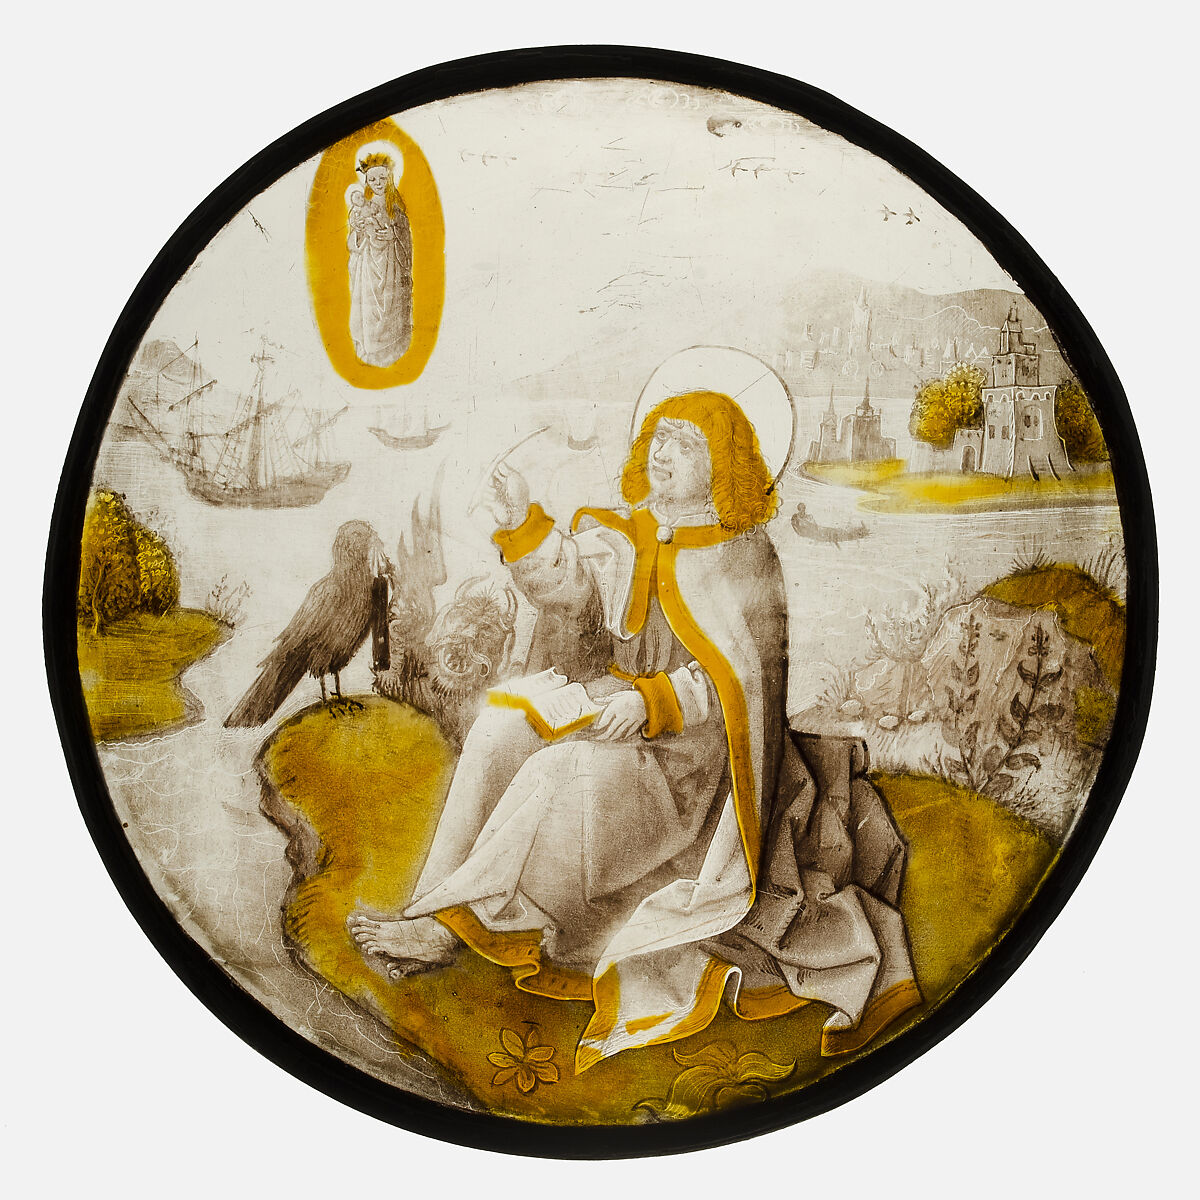 Roundel with Saint John on Patmos, Colorless glass, silver stain, vitreous paint, South Netherlandish (?) 